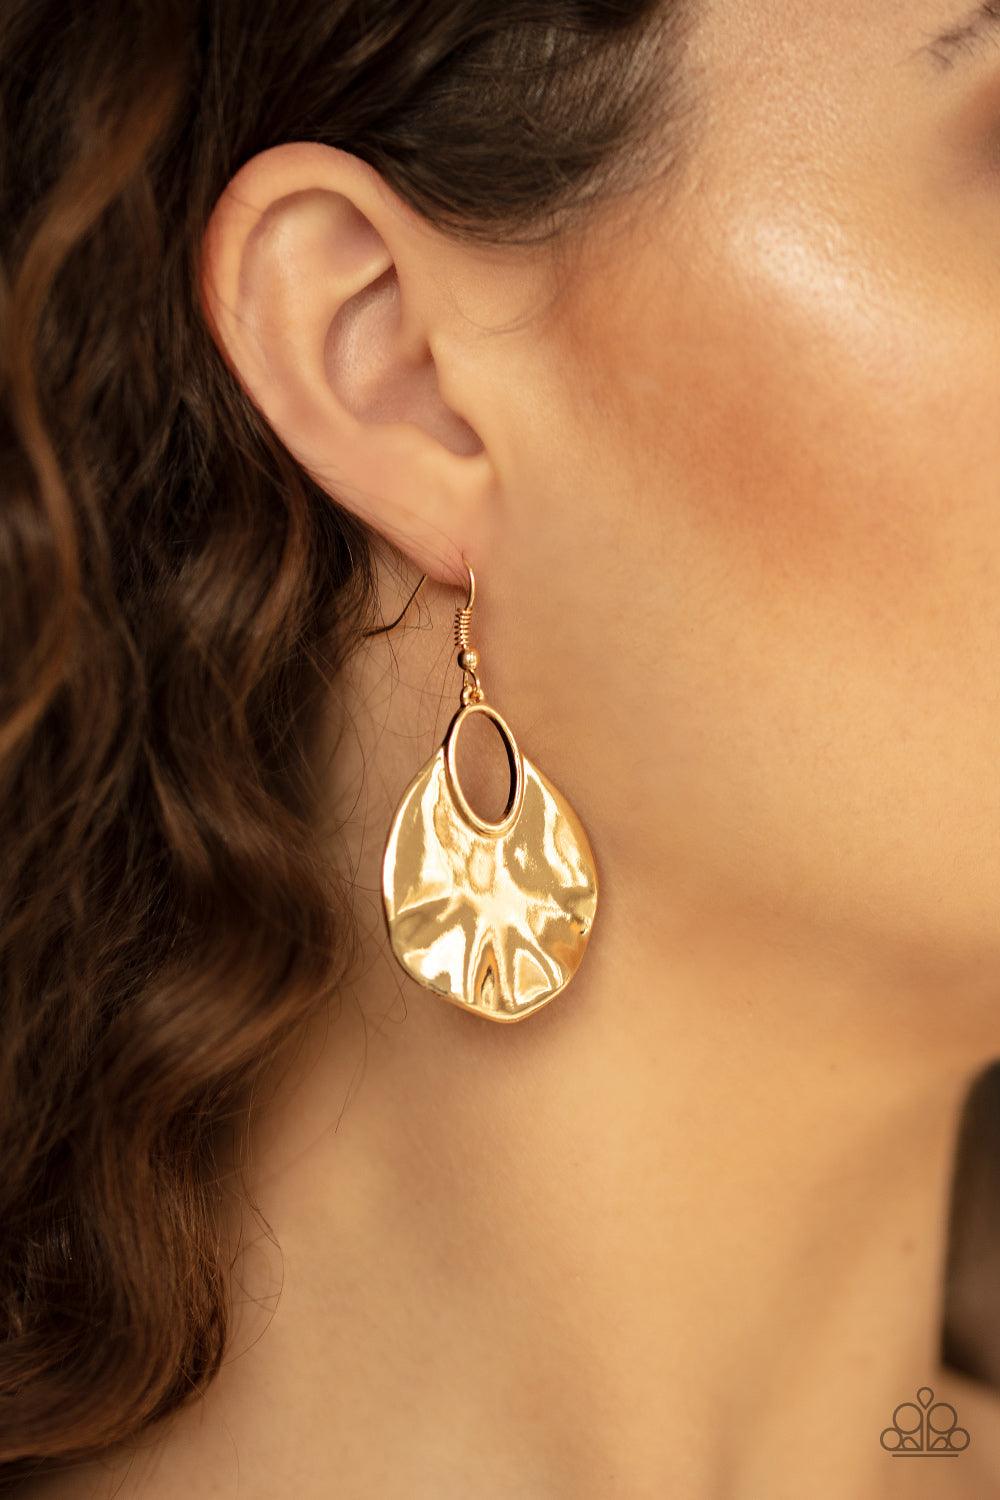 Paparazzi Accessories-Ruffled Refinery - Gold Earrings